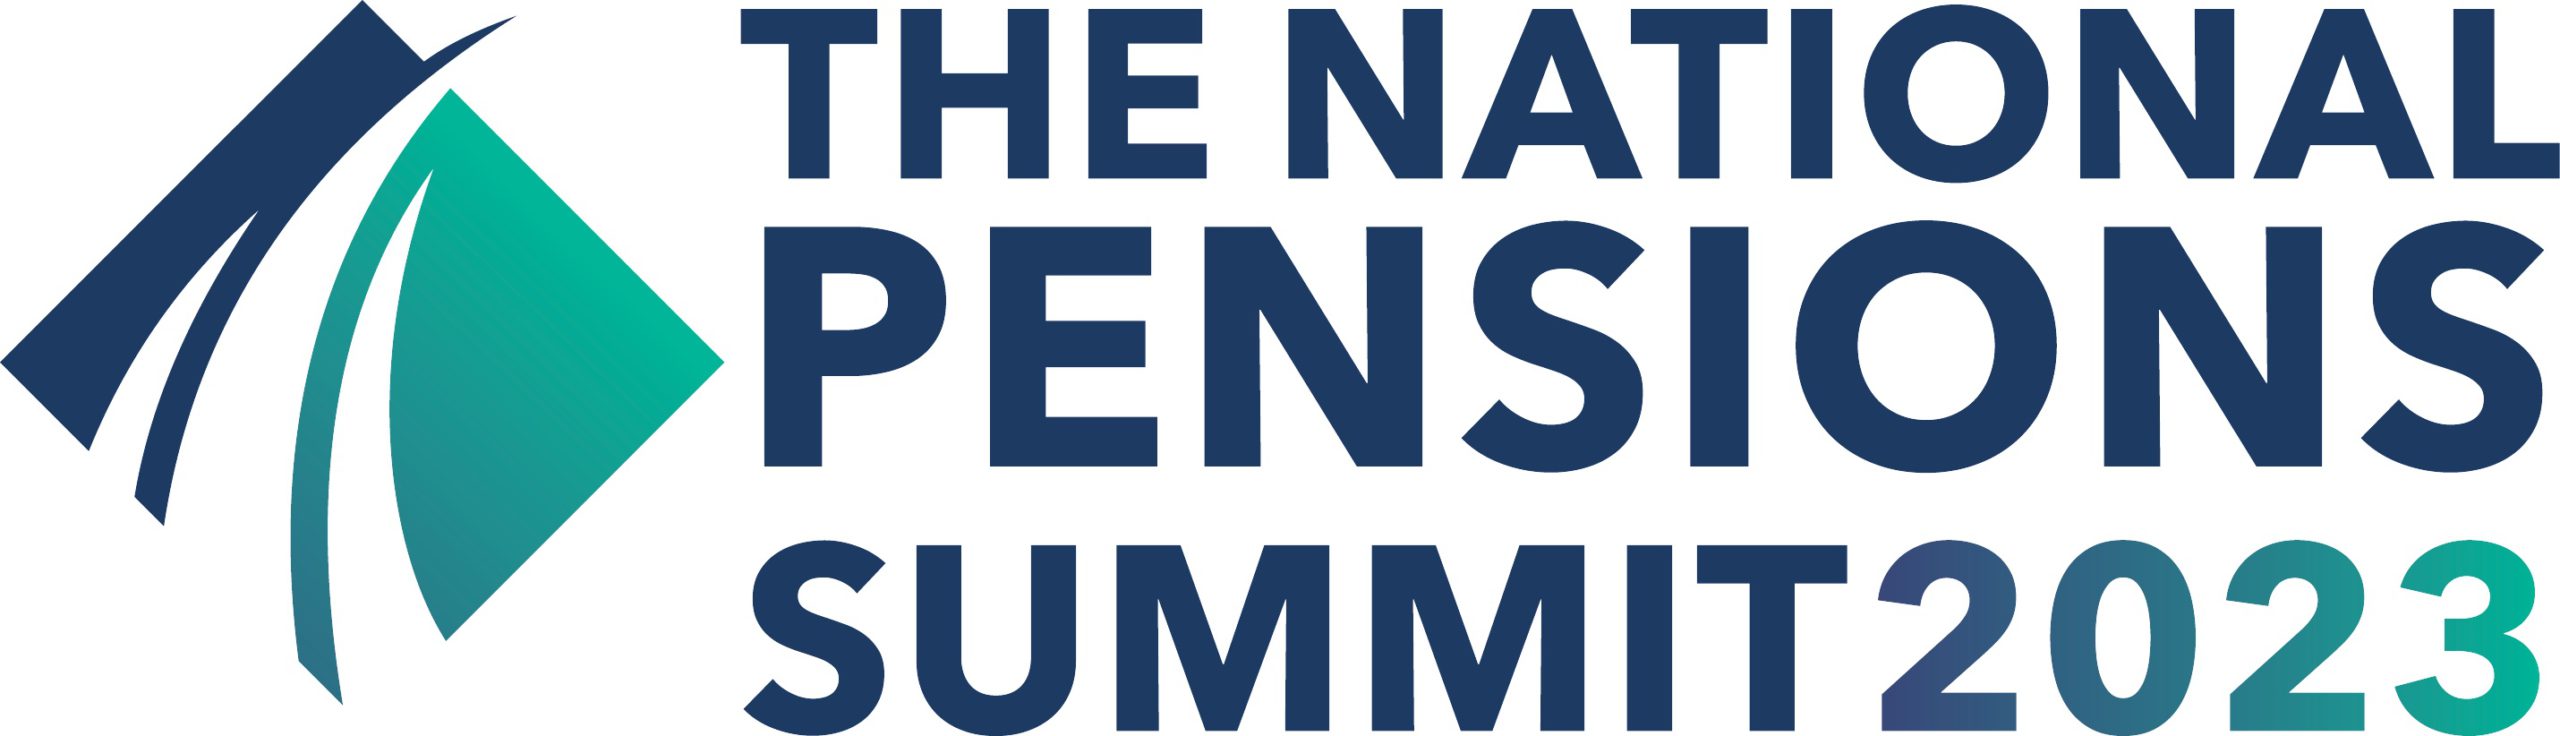 The National Pensions Summit 2023